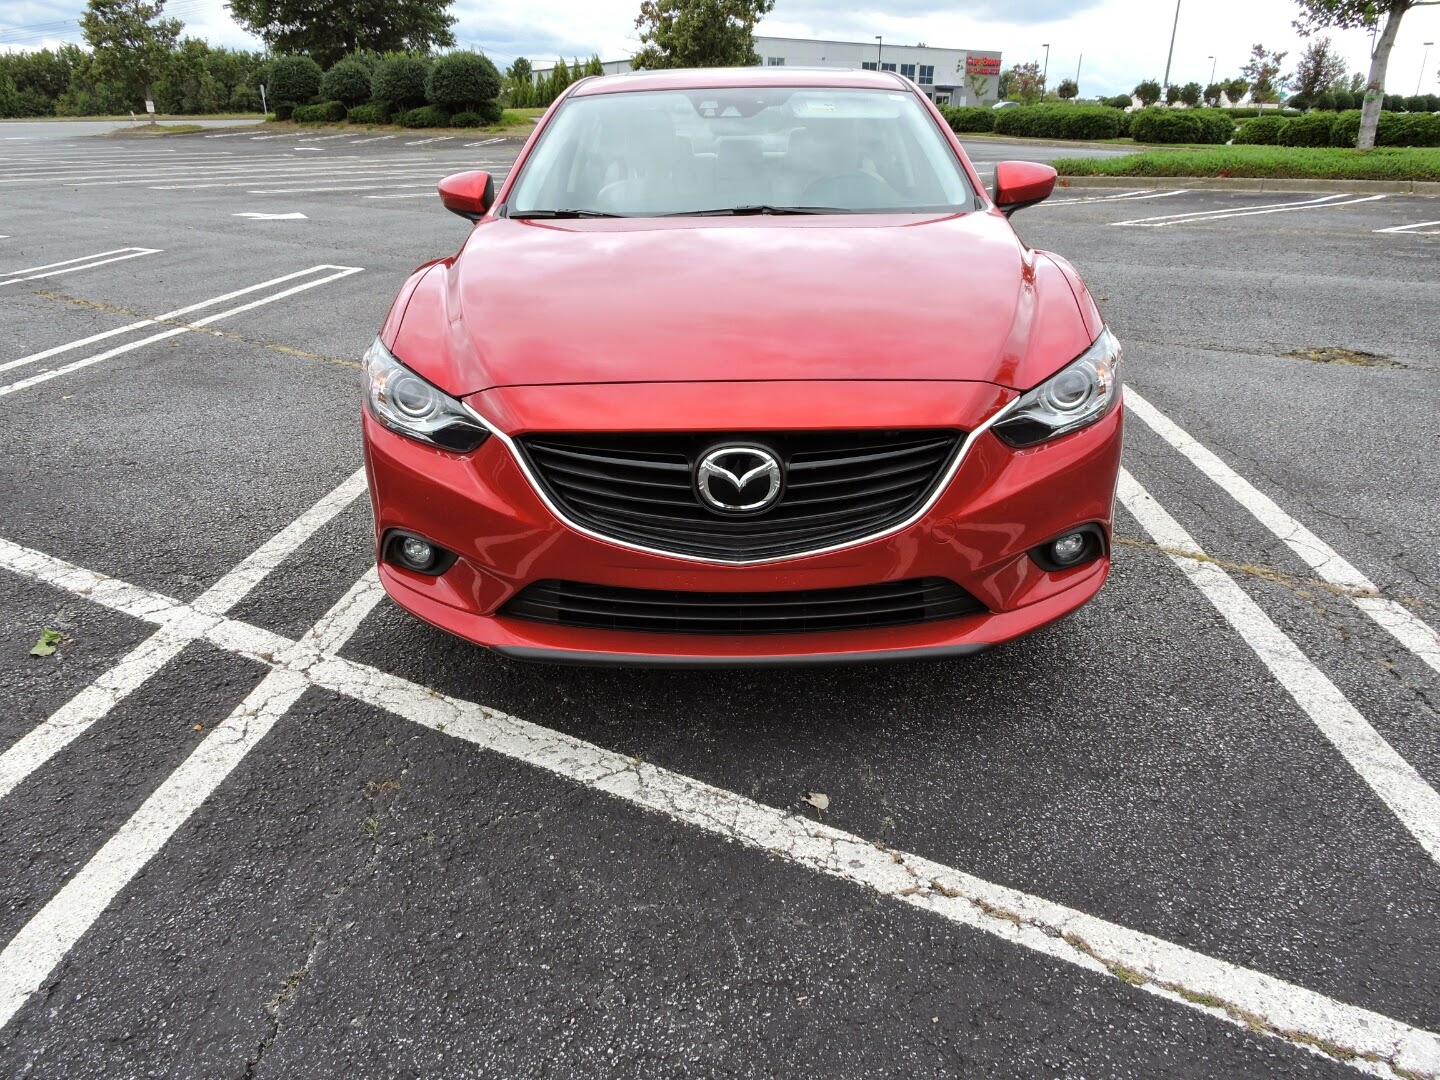 Adventures in 2015 Mazda 6 and Review #Mazda6 via www.productreviewmom.com